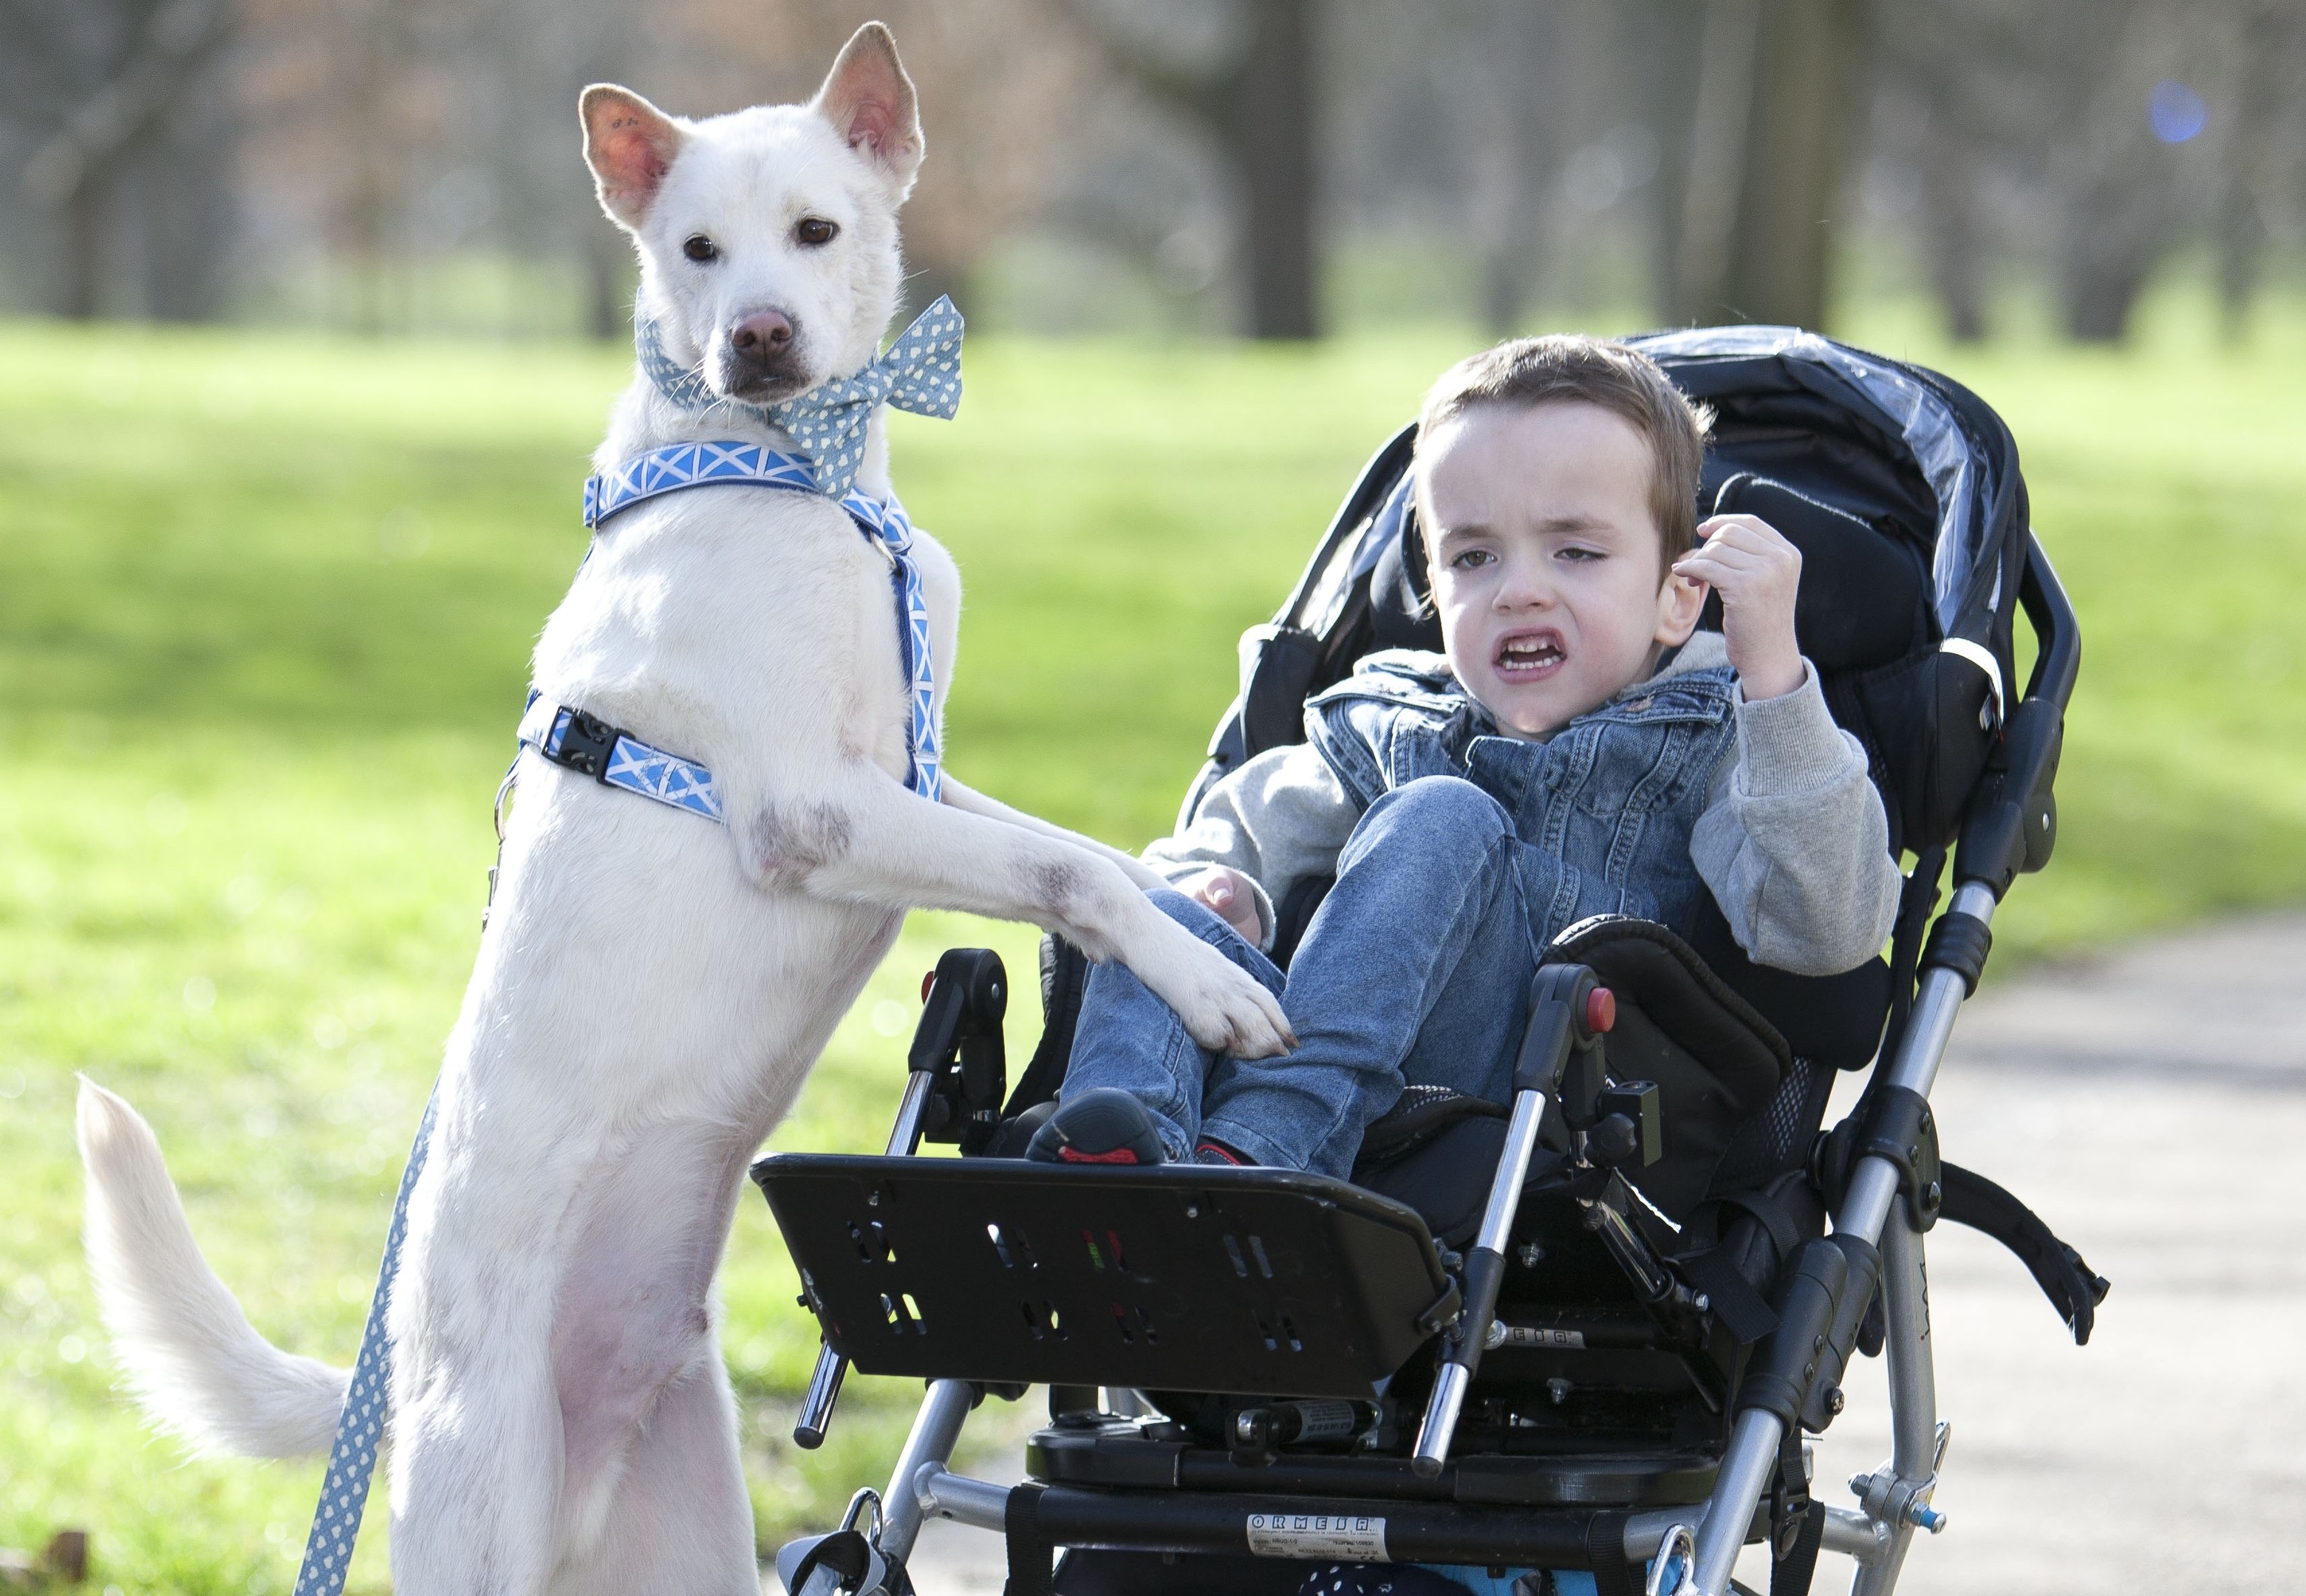 Miracle the dog and six-year-old Kyle Leask